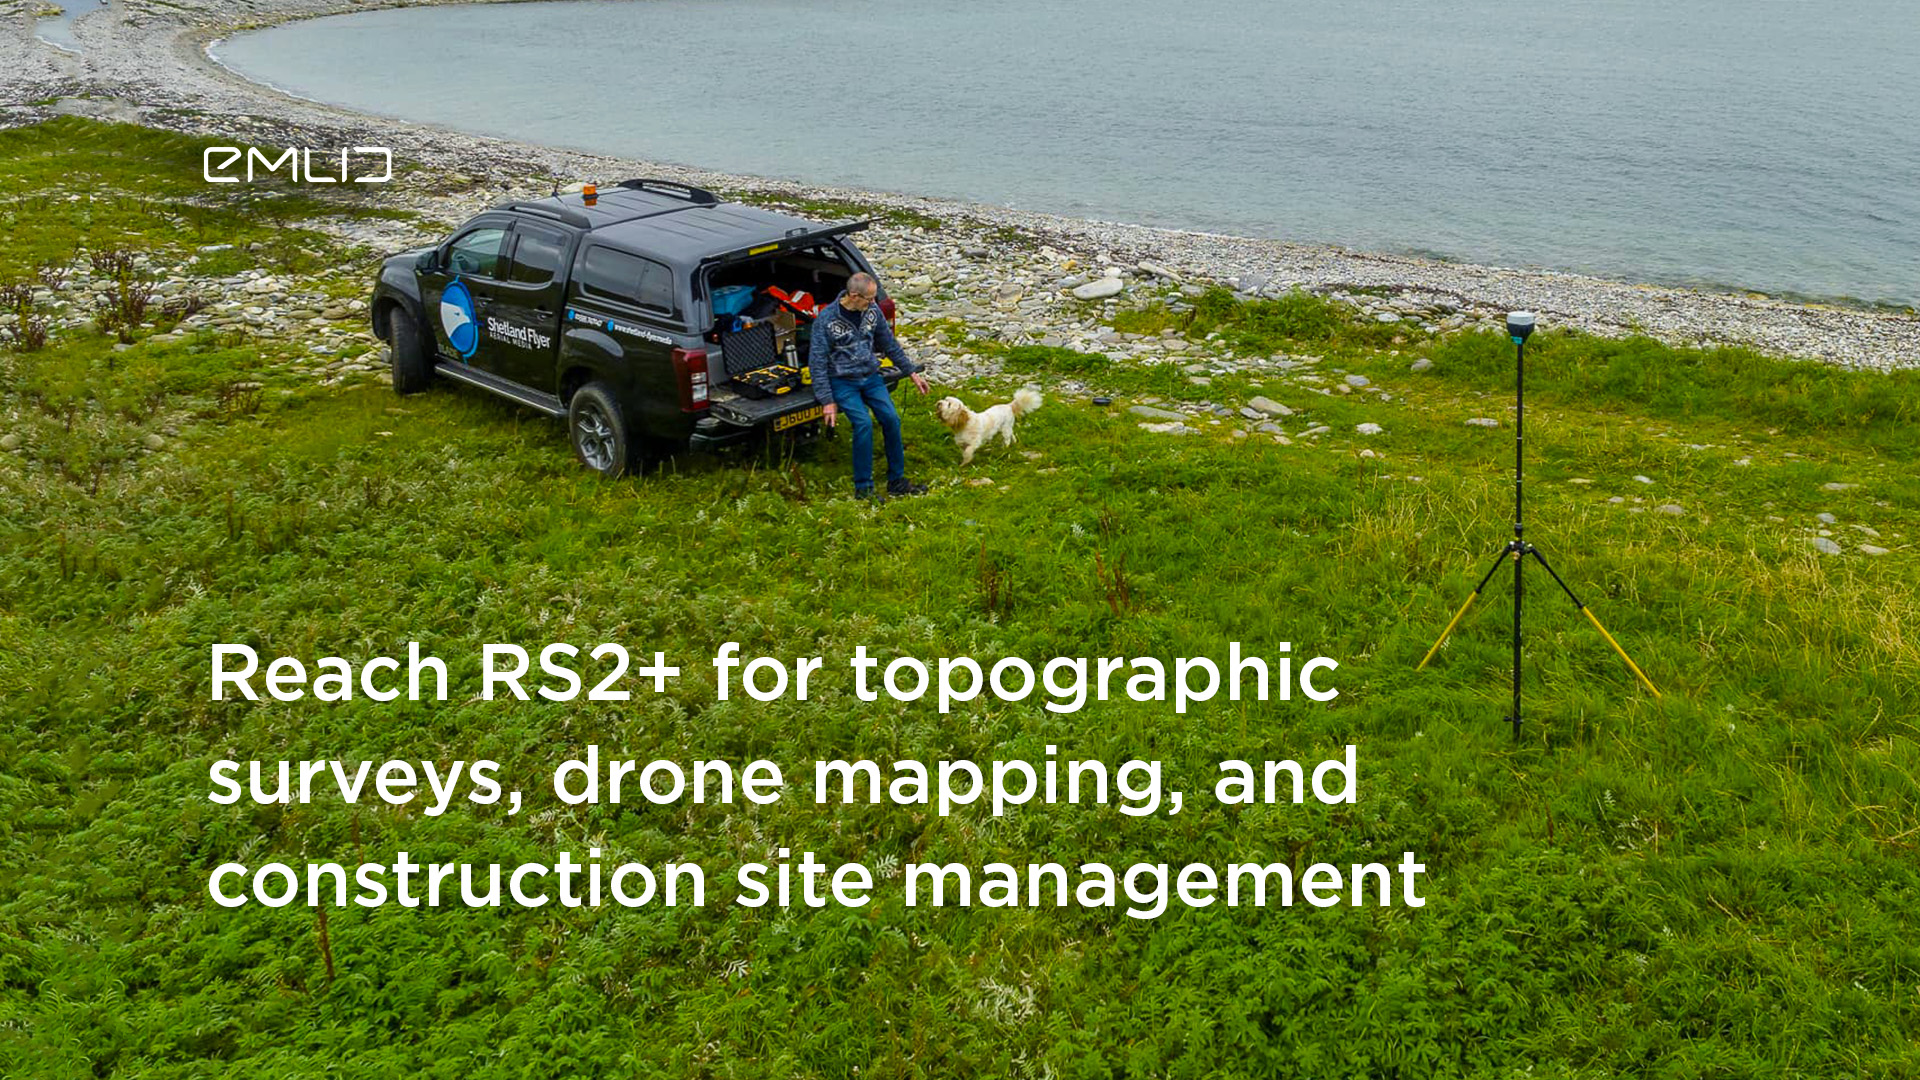 Reach RS2+ for drone mapping survey